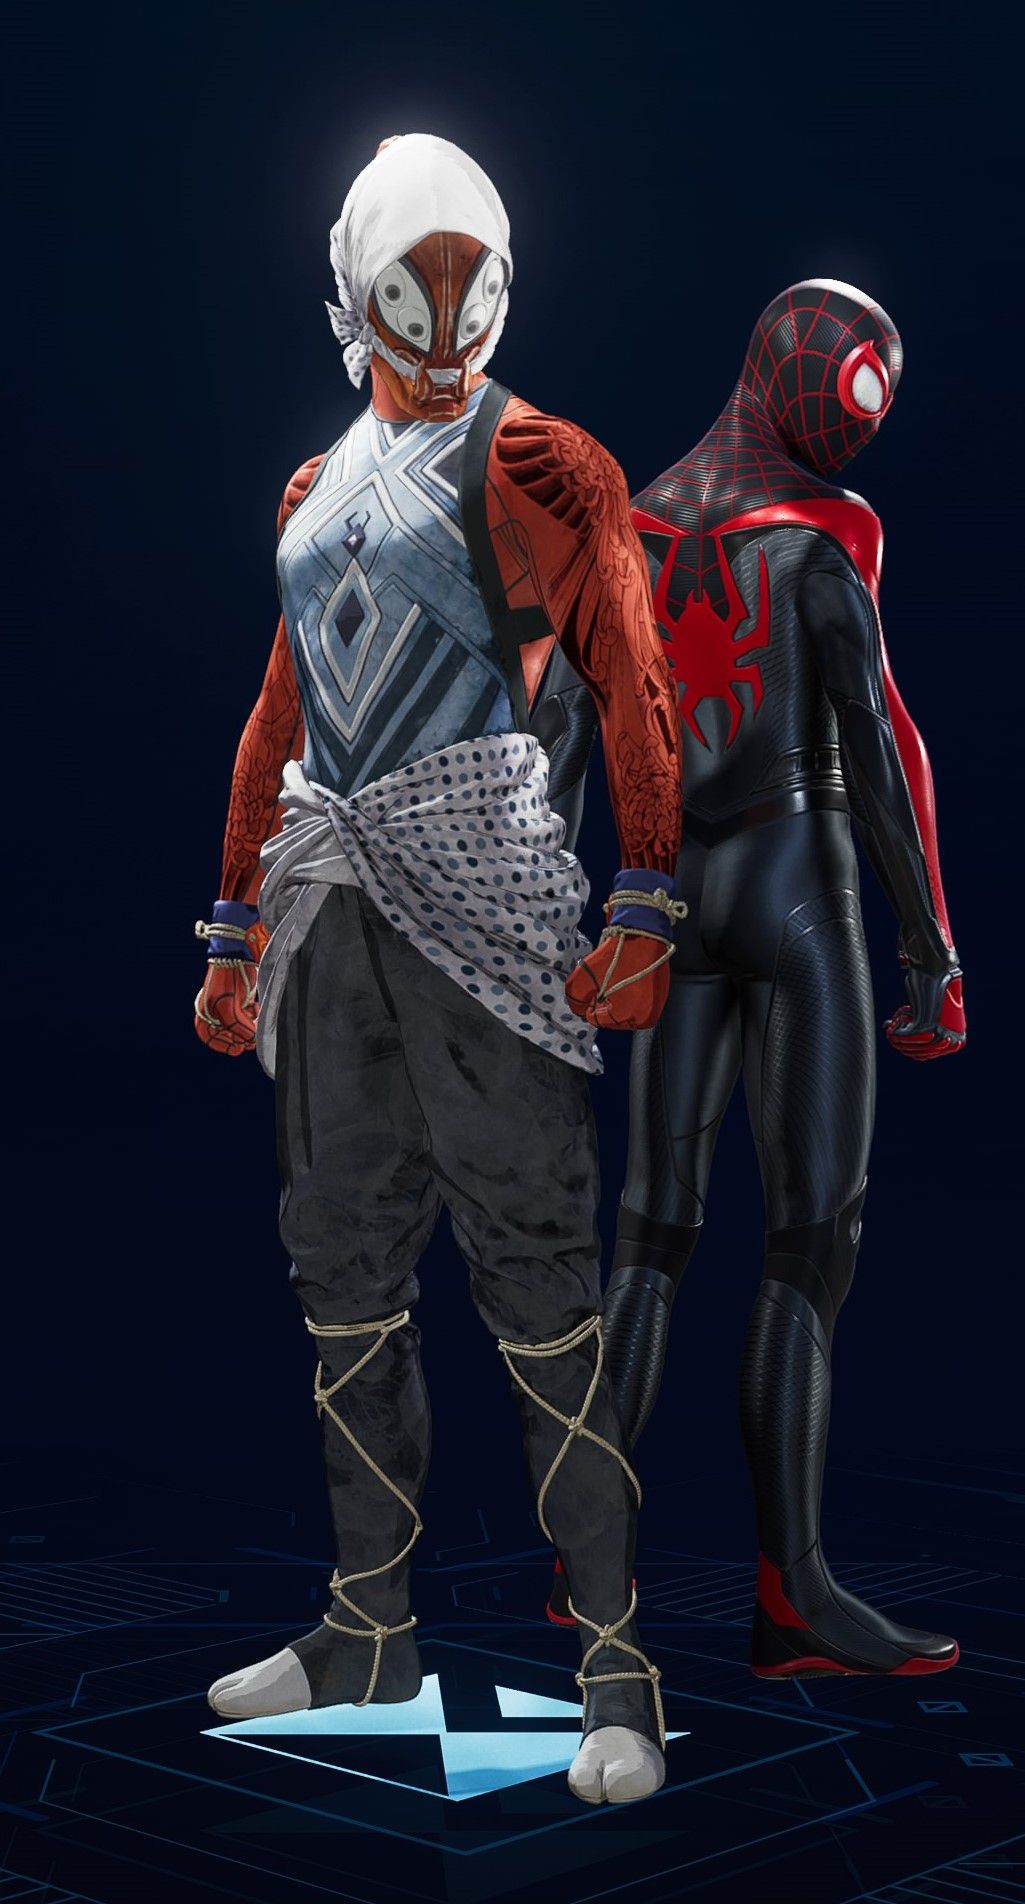 Peter Parker stands in his Kumo Suit in the suit selection screen of Spider-Man 2.